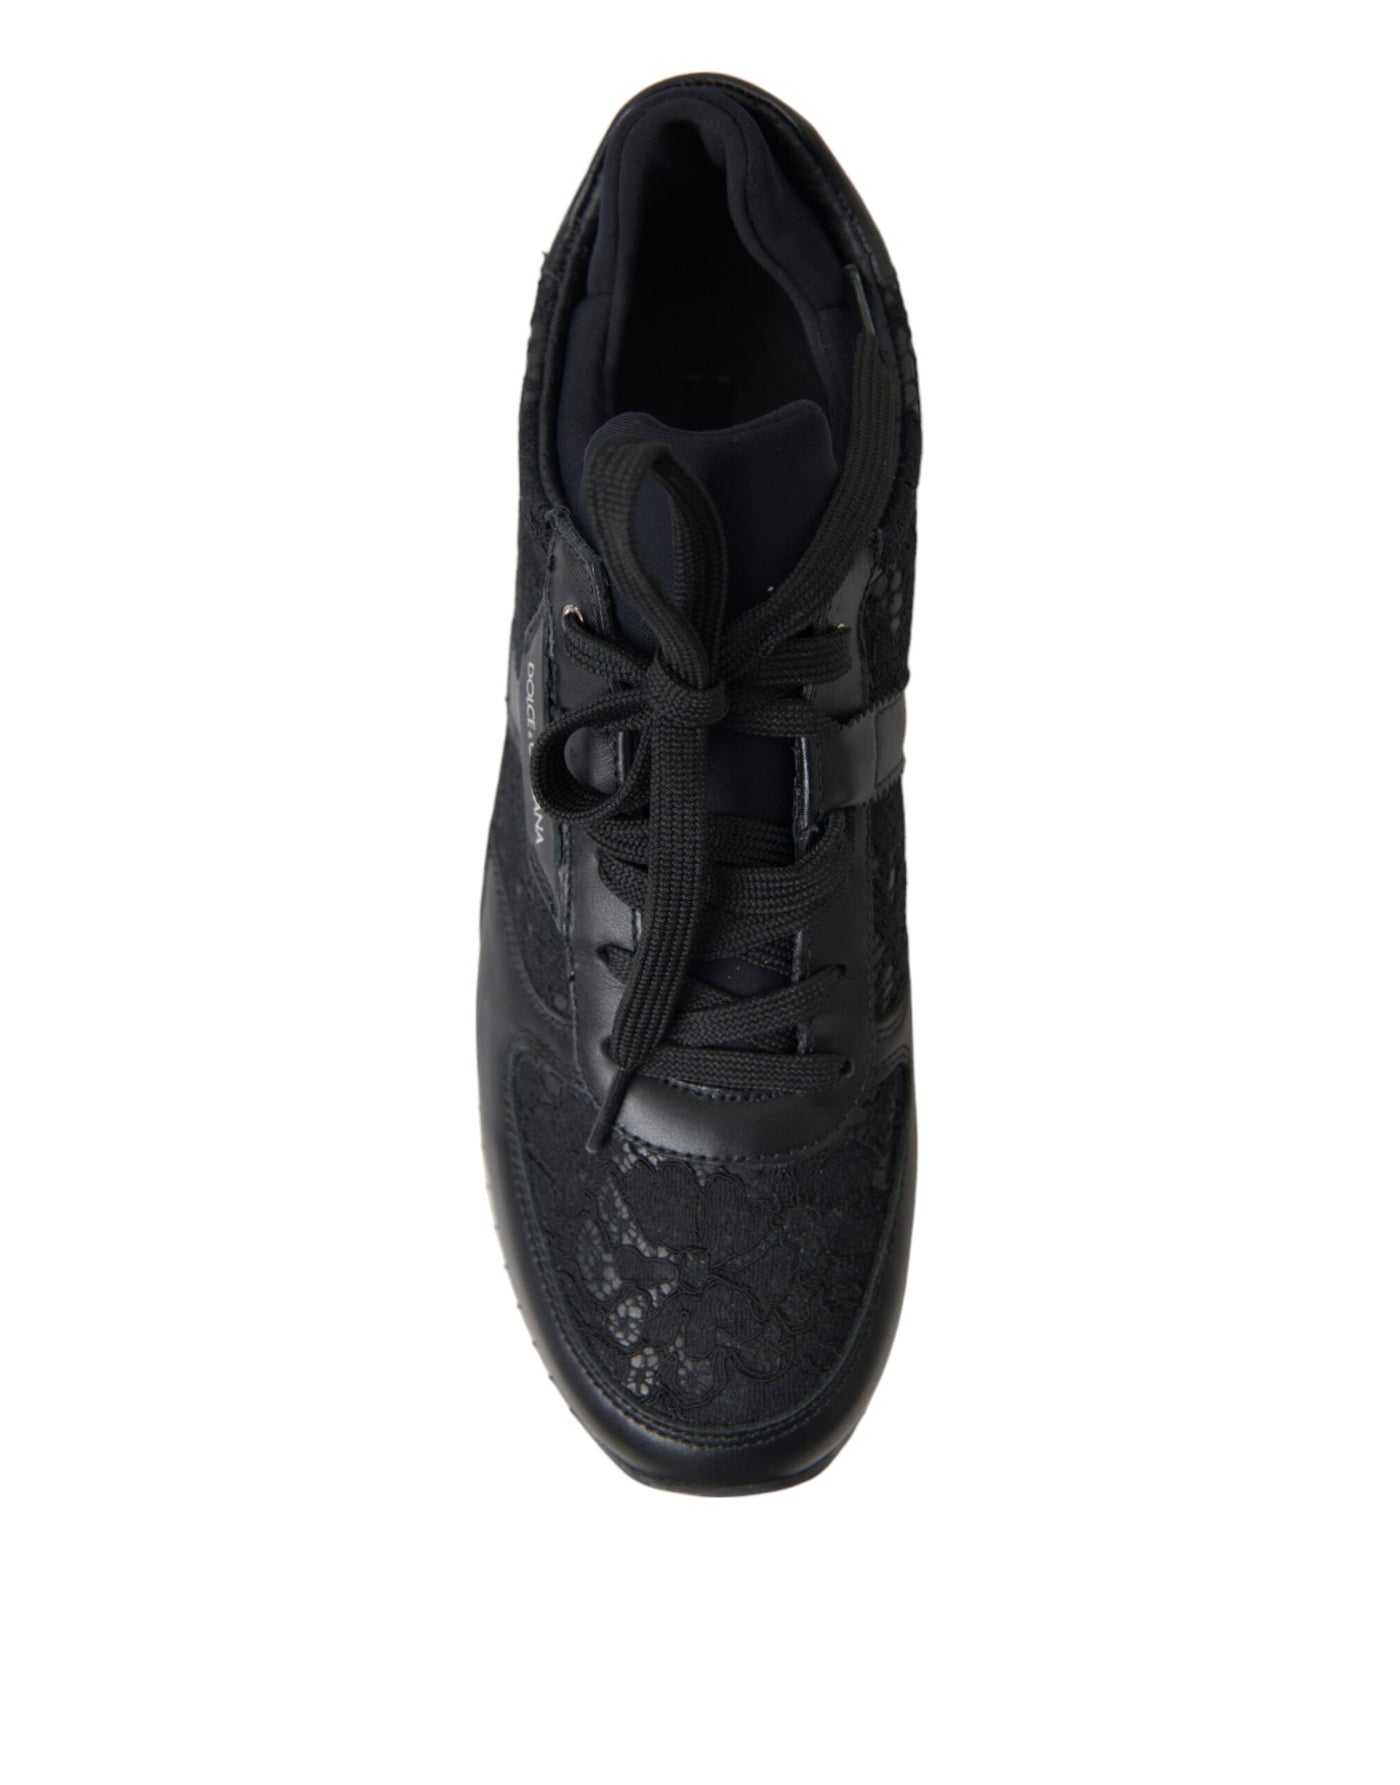 Dolce & Gabbana Black Floral Lace Leather Sneakers Shoes